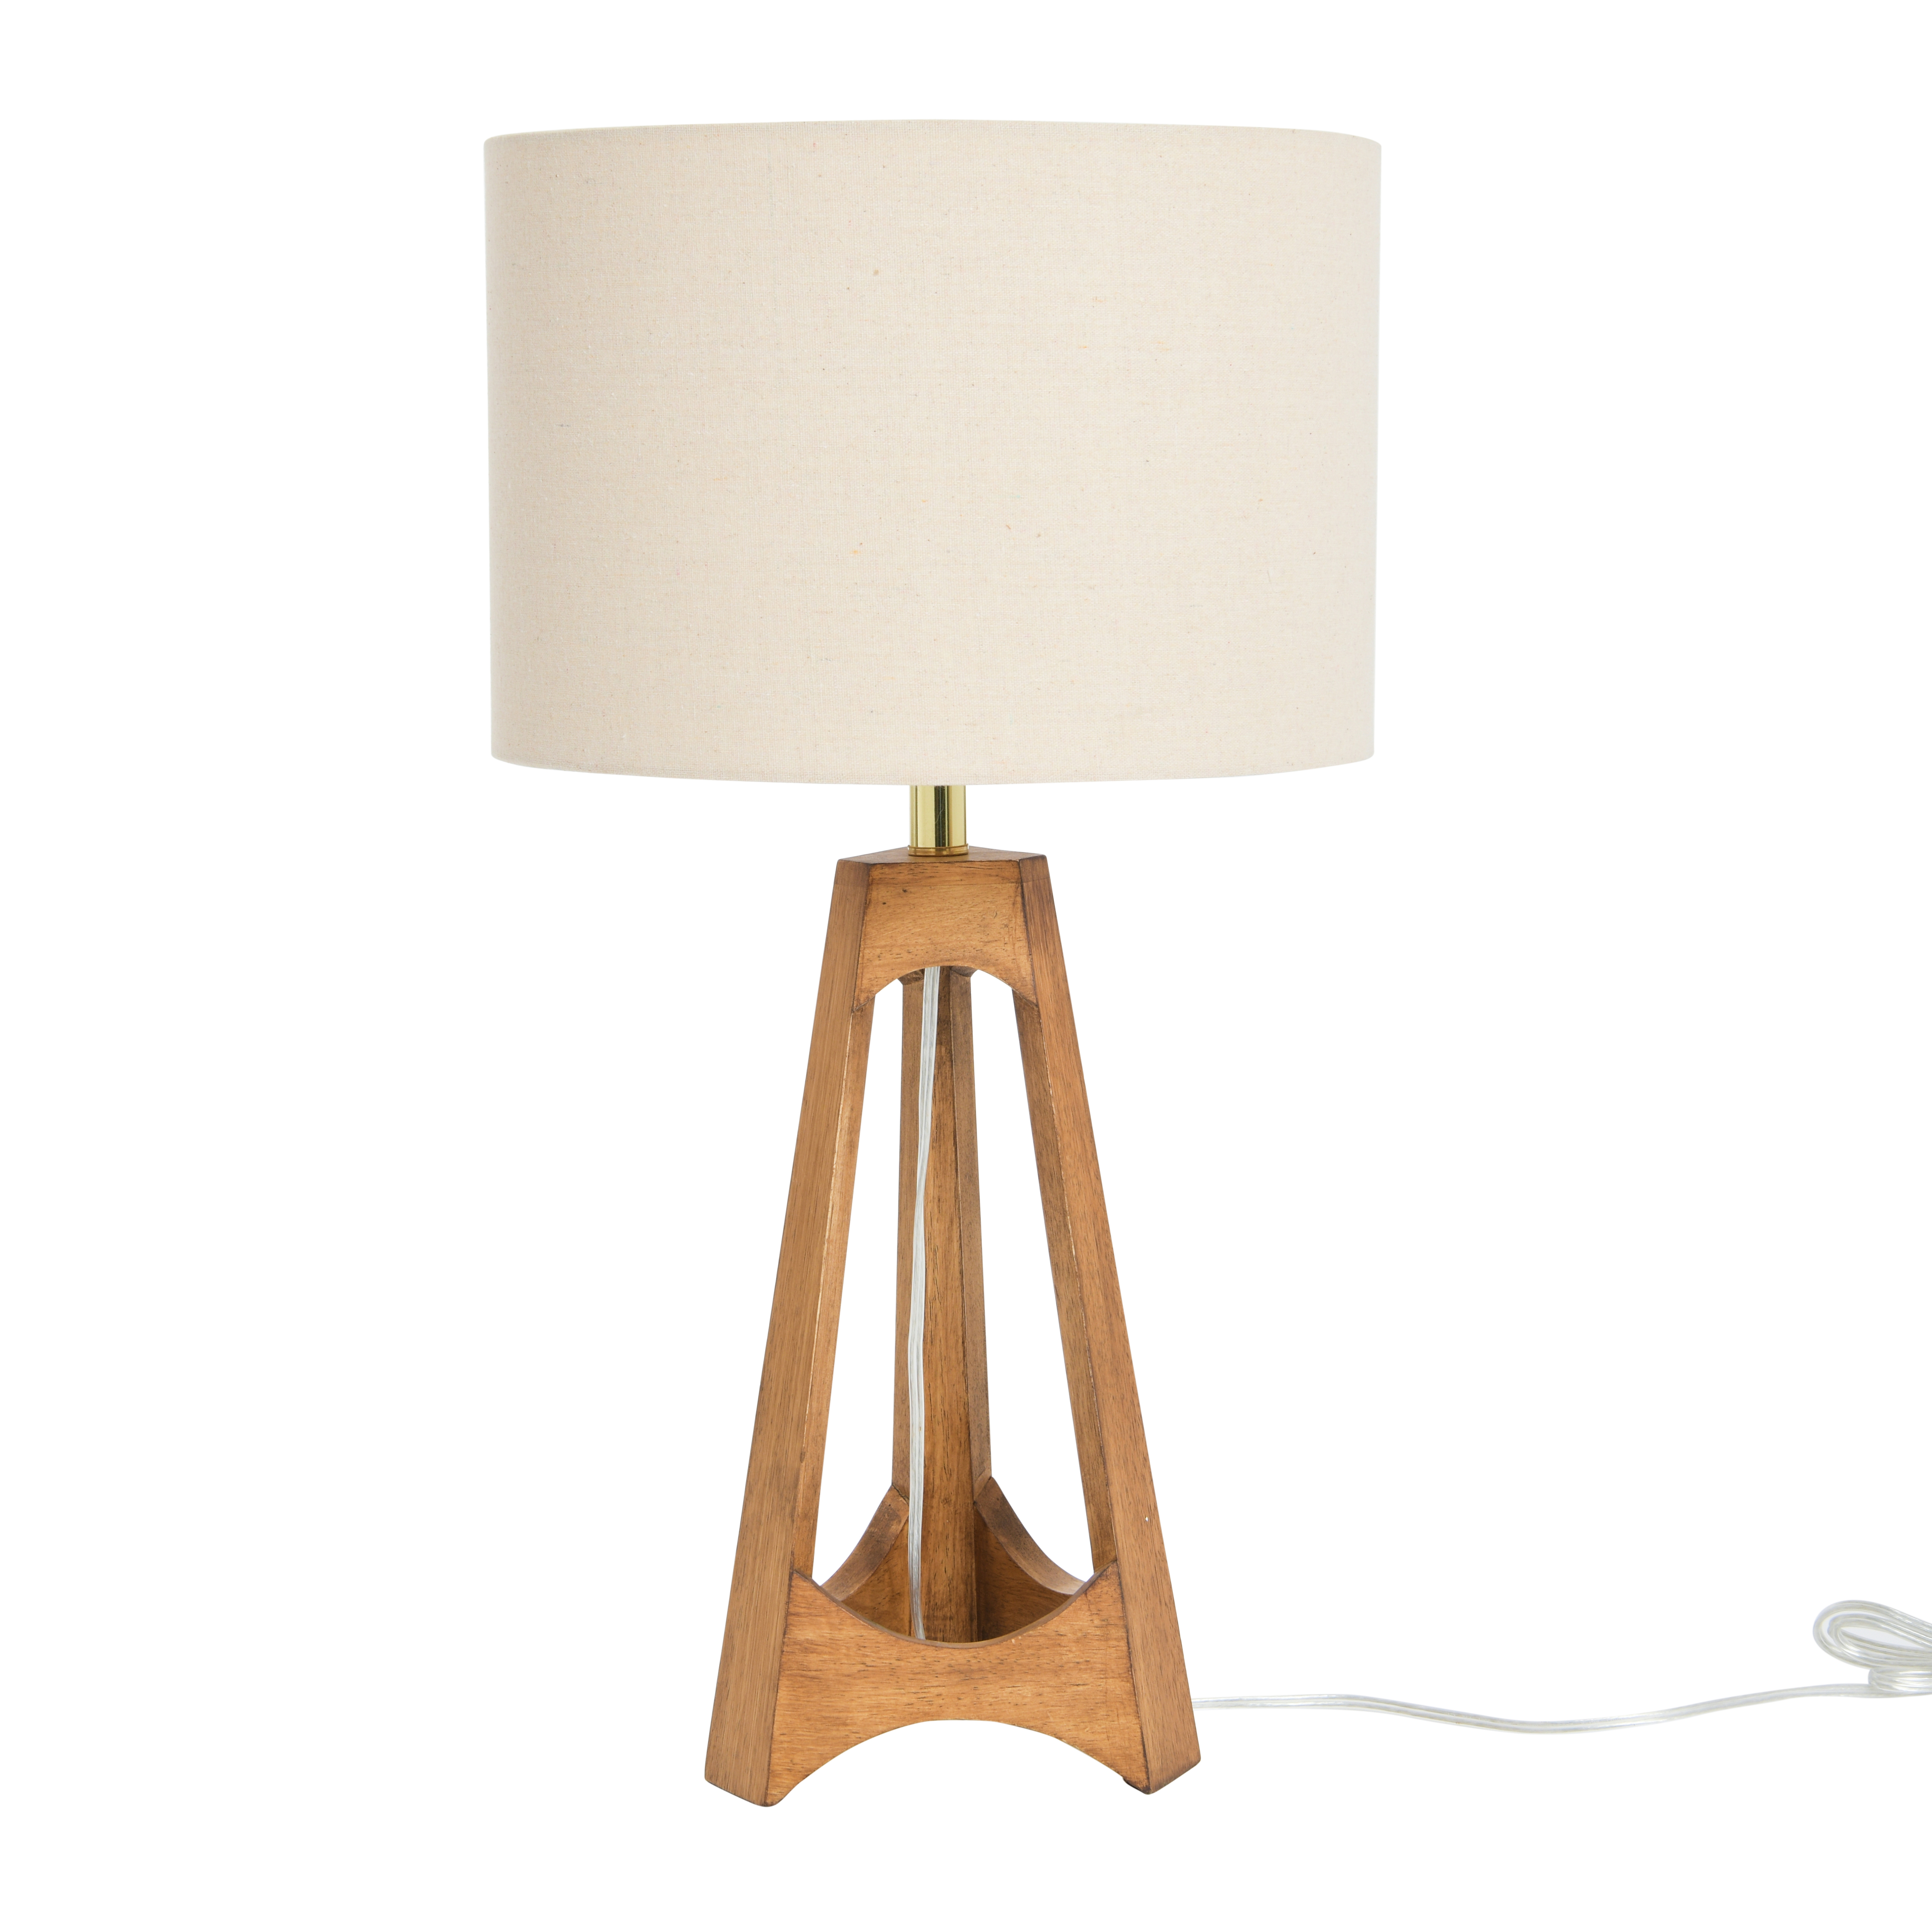 A-Frame Rubber Wood Table Lamp with Cream Linen Shade, Espresso - Nomad Home